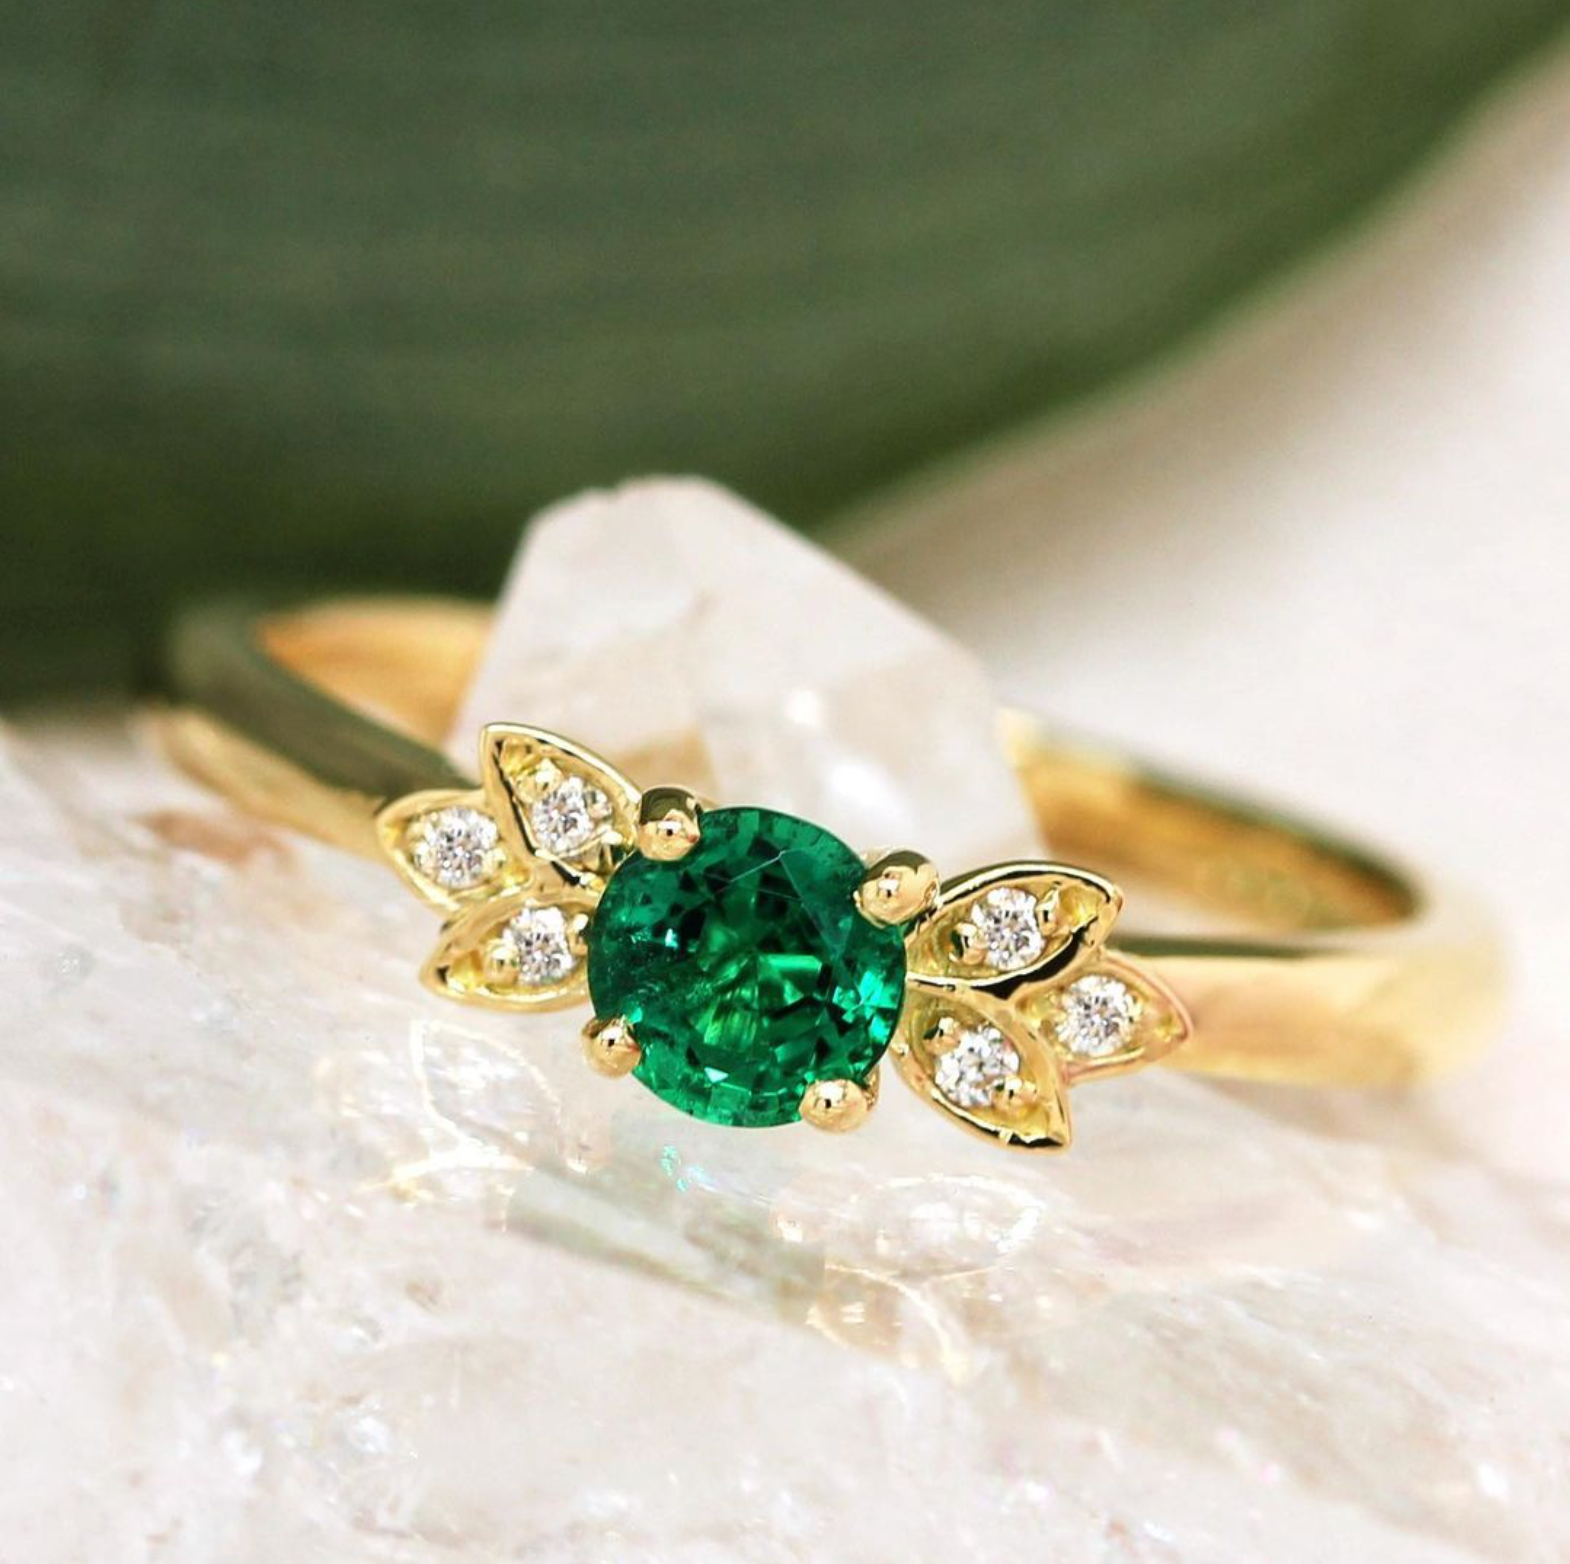 Vintage Emerald Ring 1CT Hexagon Cut Inspired Leaf Emerald Engagement Ring  White Gold Unique Cluster Green Stone Wedding Ring for Women - Etsy | Emerald  ring vintage, Silver band engagement rings, Emerald